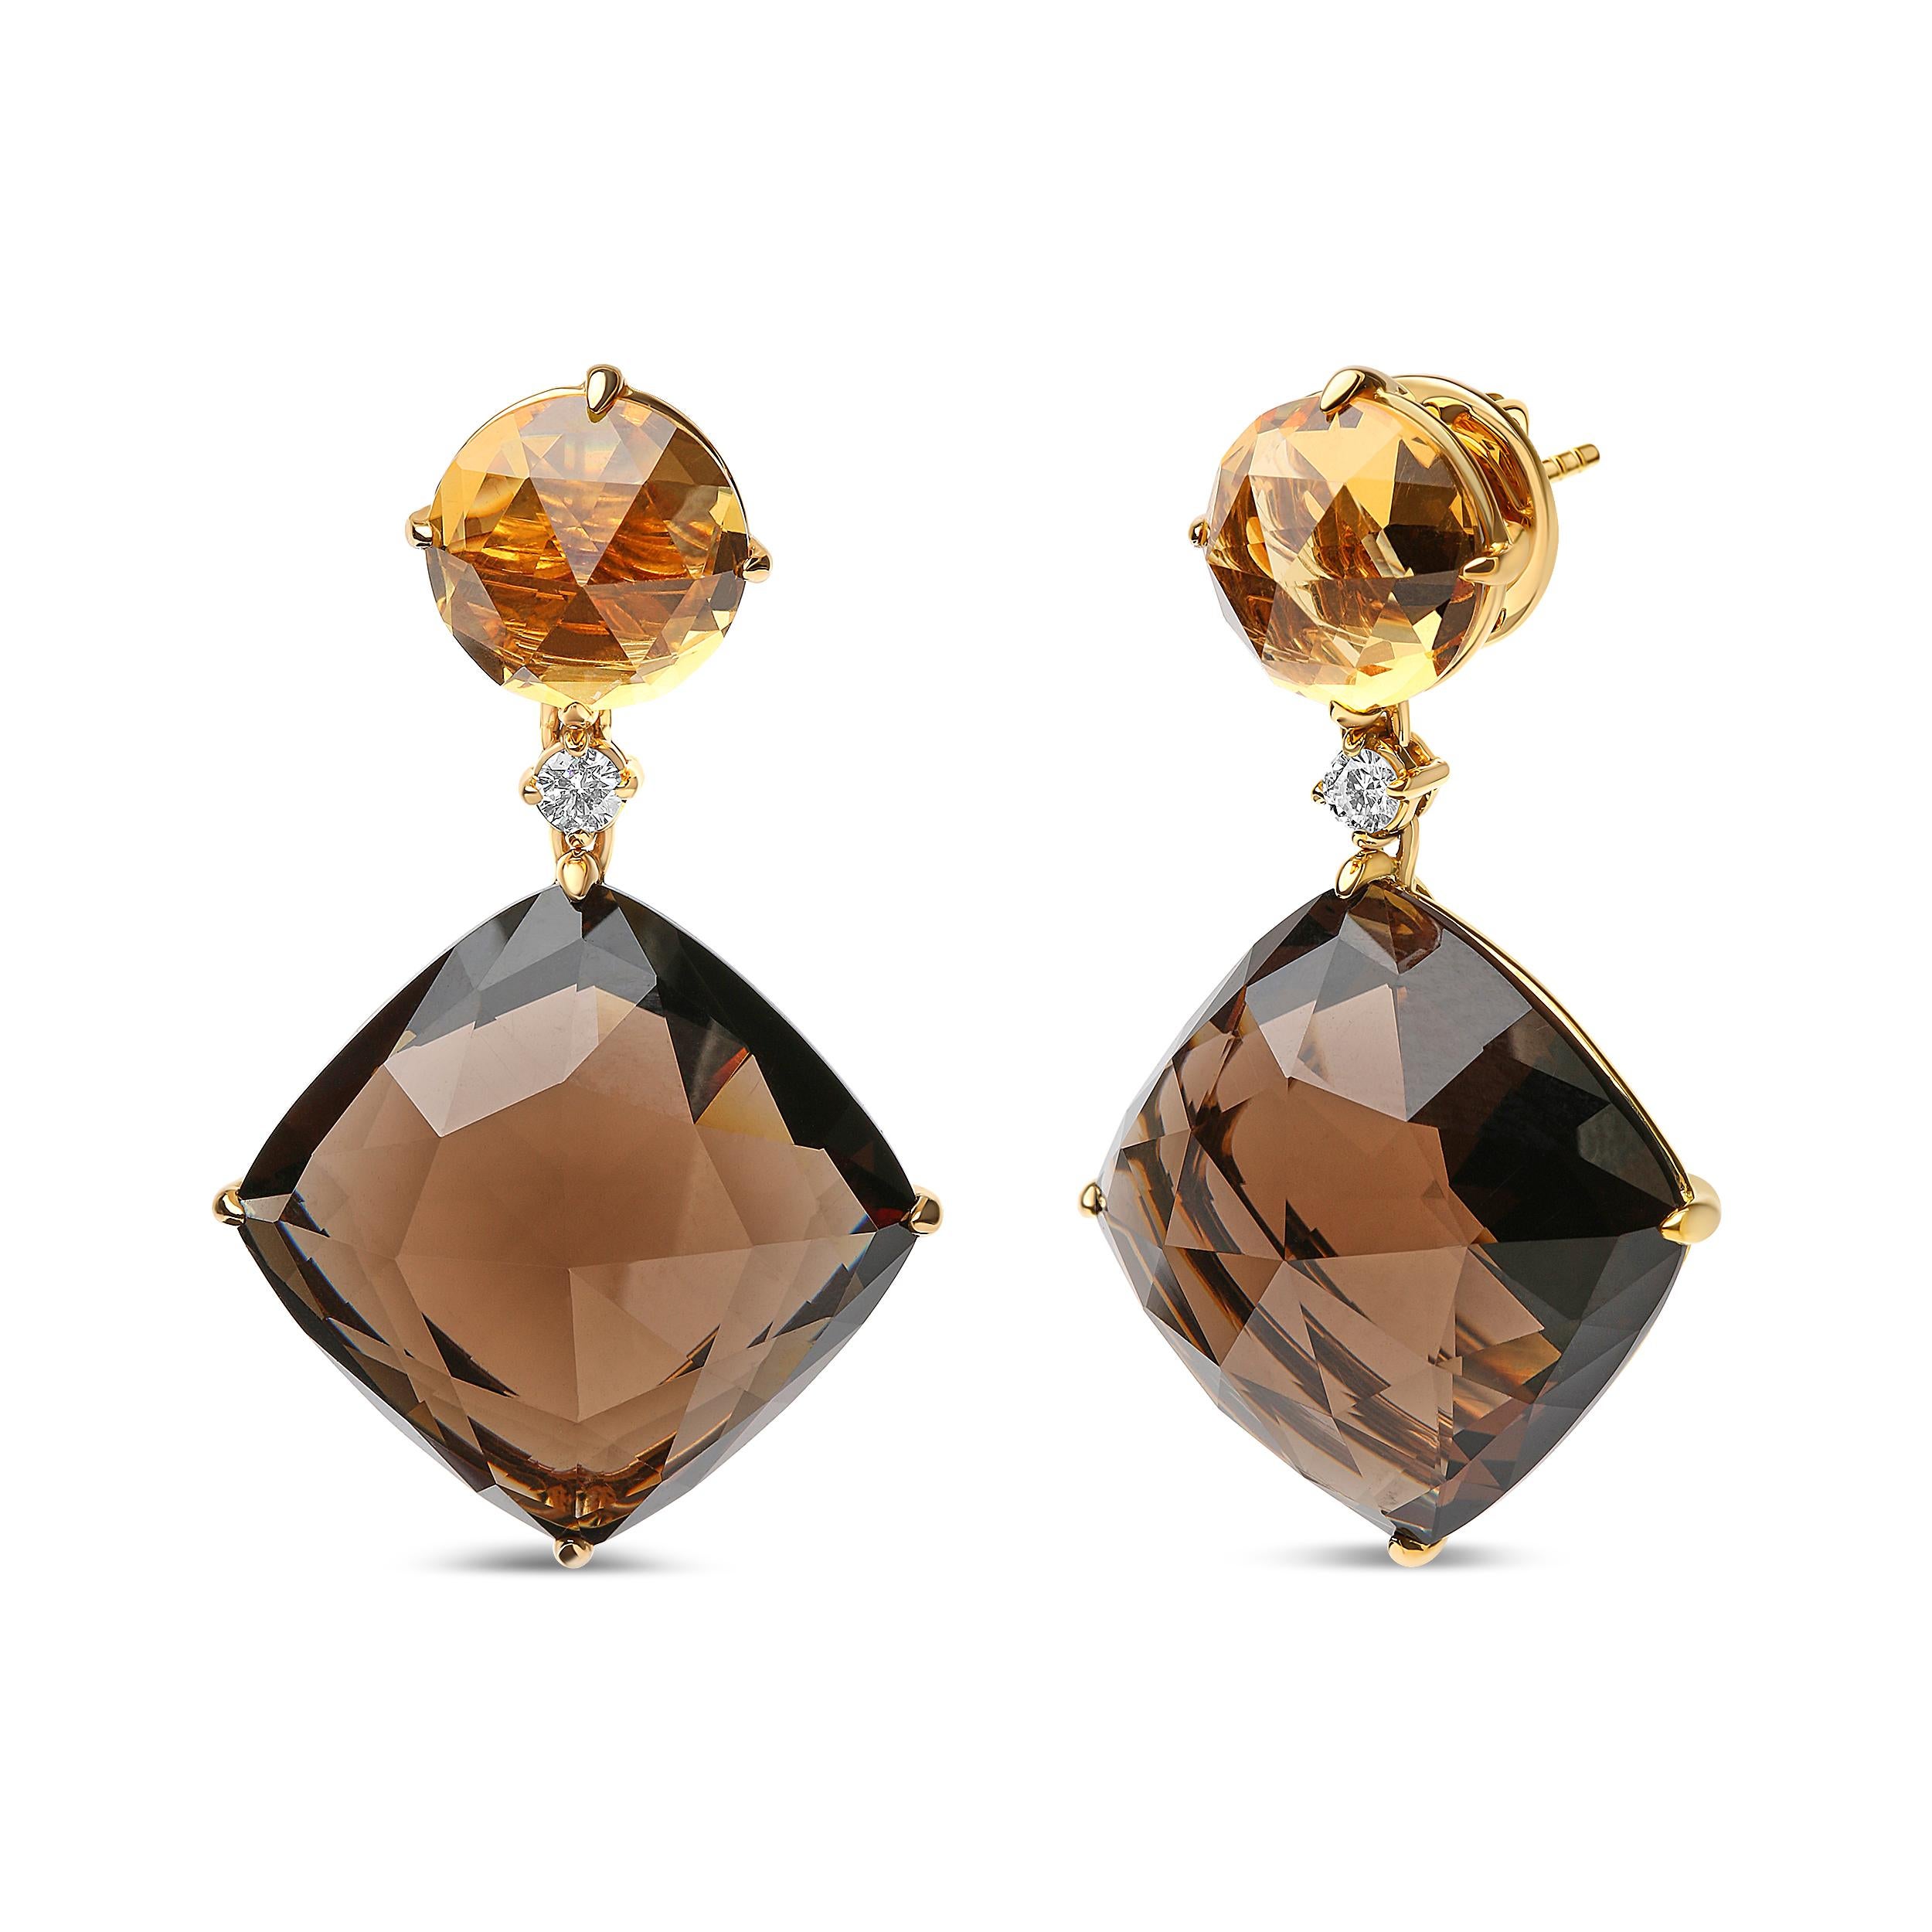 These statement 18k yellow gold dangle earrings are ready to elevate your wardrobe with their sparkling wealth! Mounted in 4-prong settings, natural 10x10mm round heat-treated yellow citrine gemstones shine brilliantly in a checkerboard cut in each